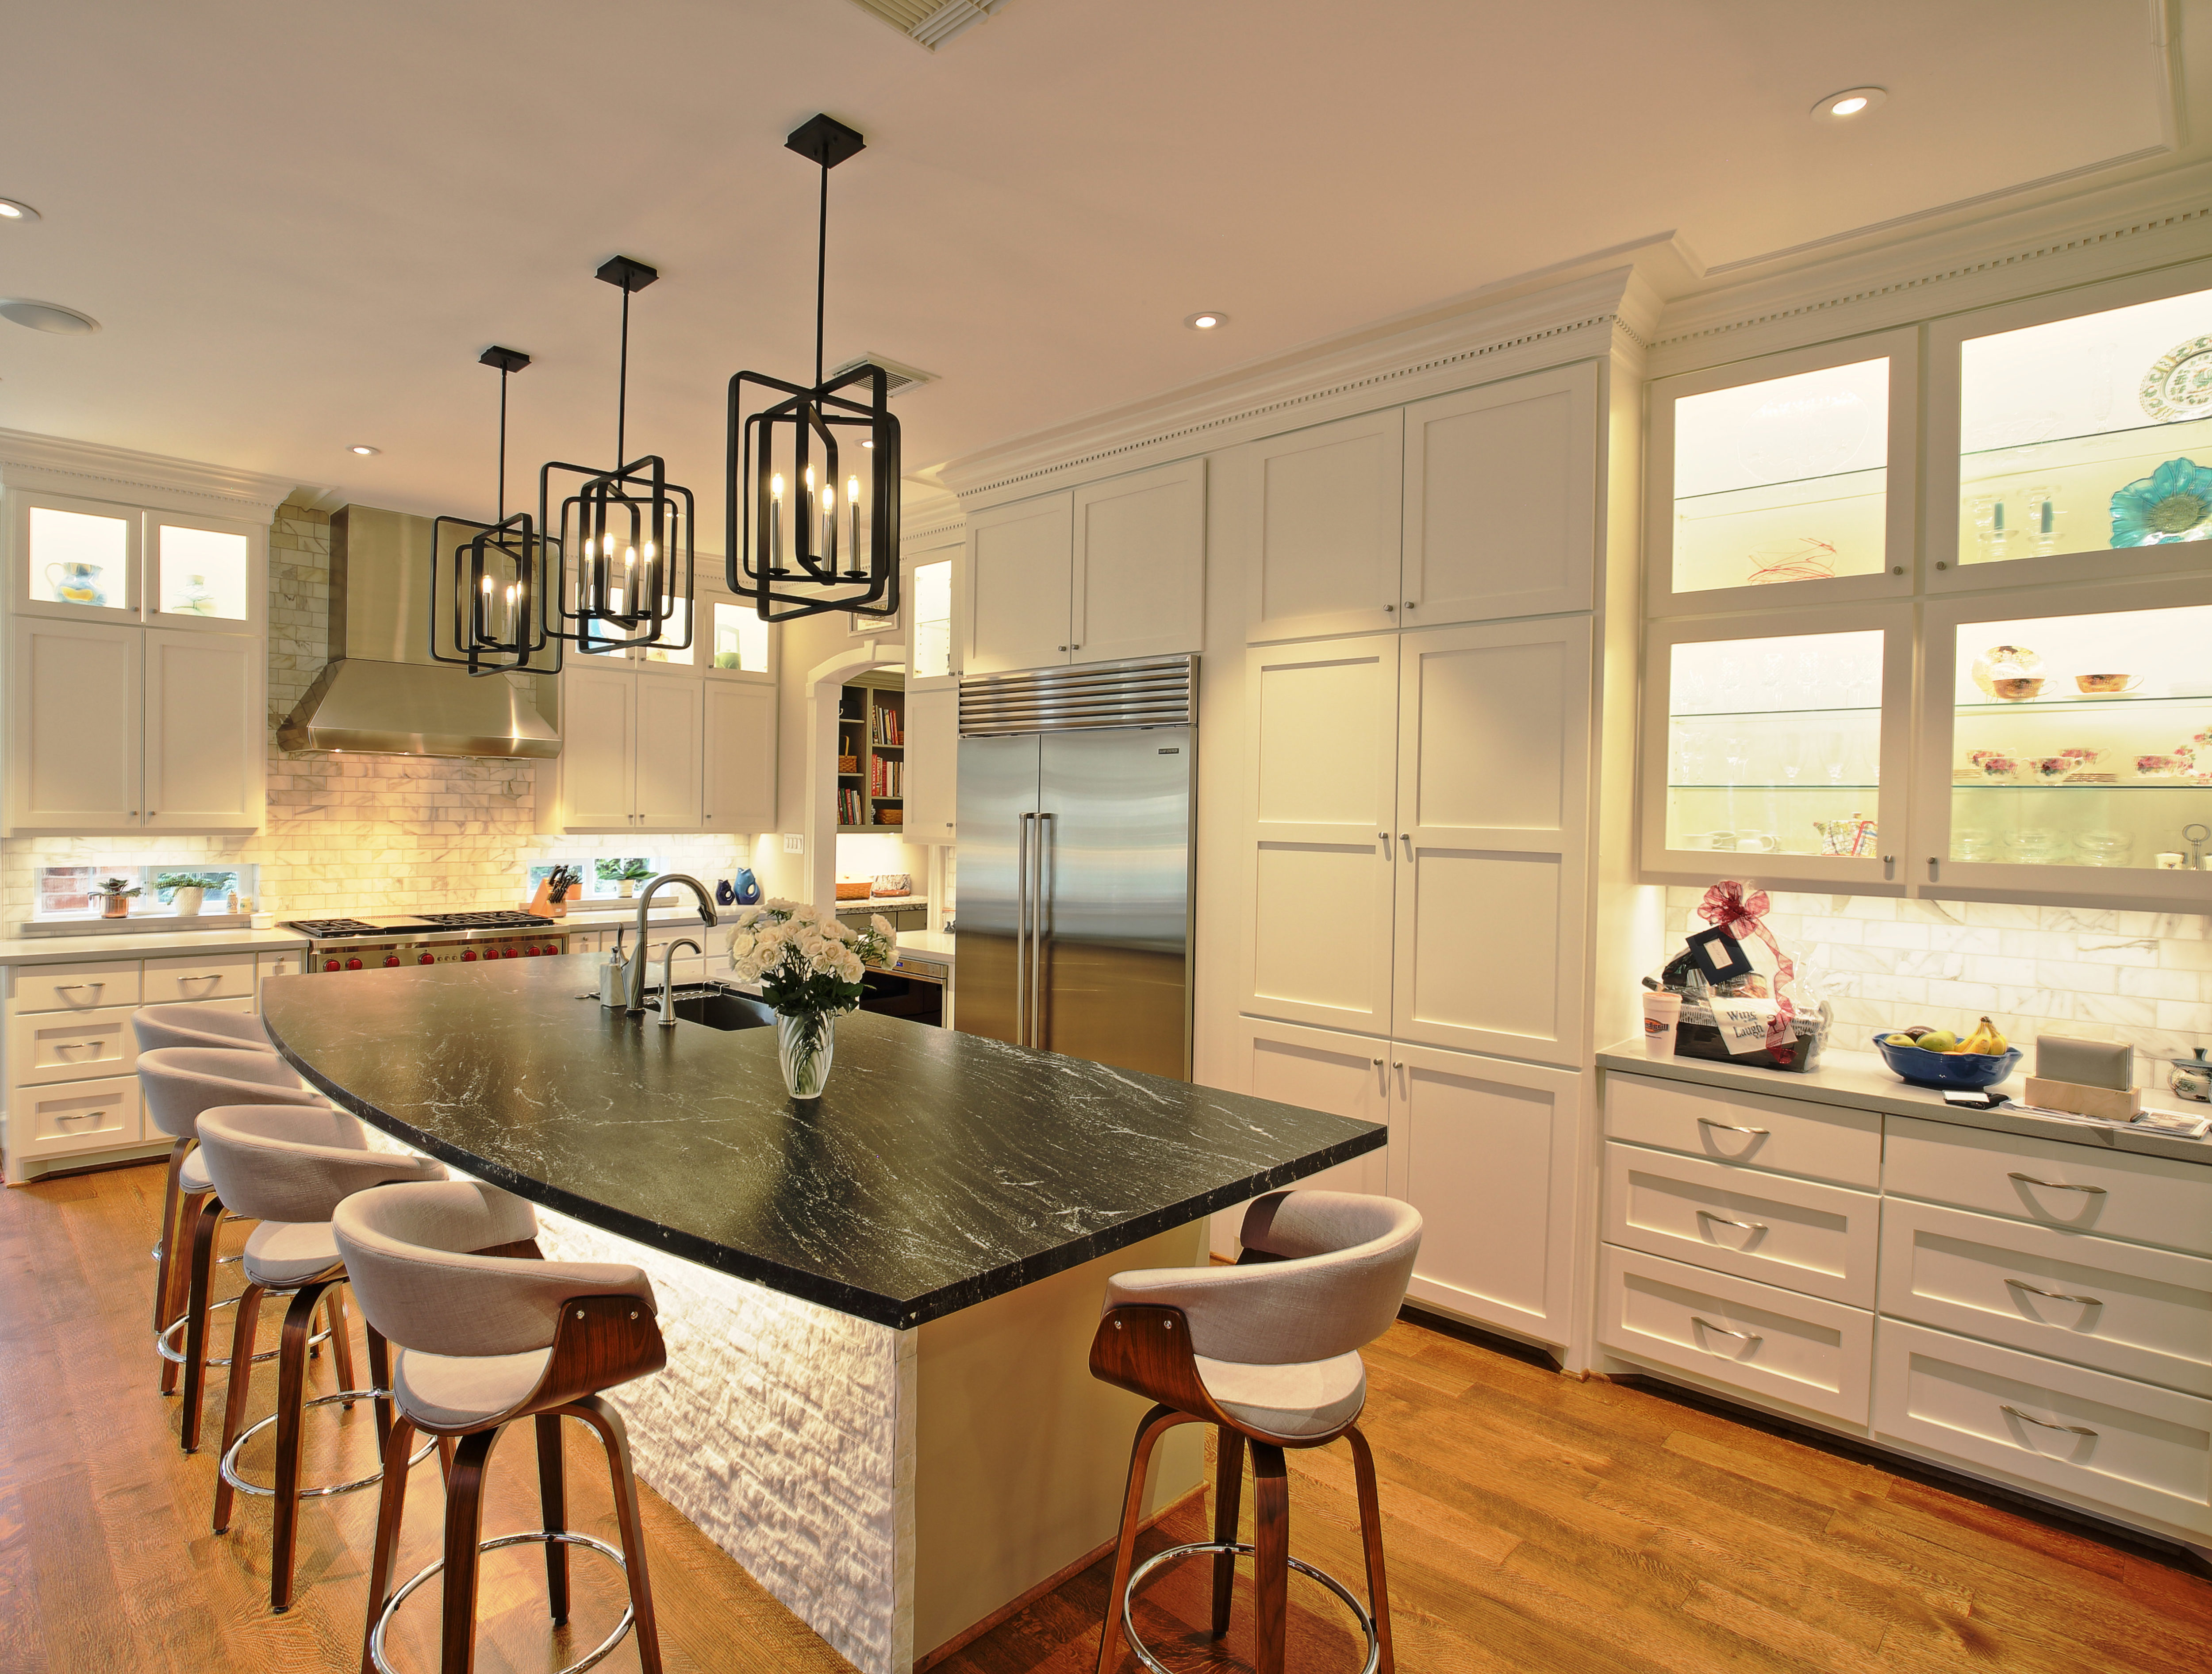 This kitchen features LED lighting for ambiance and energy savings